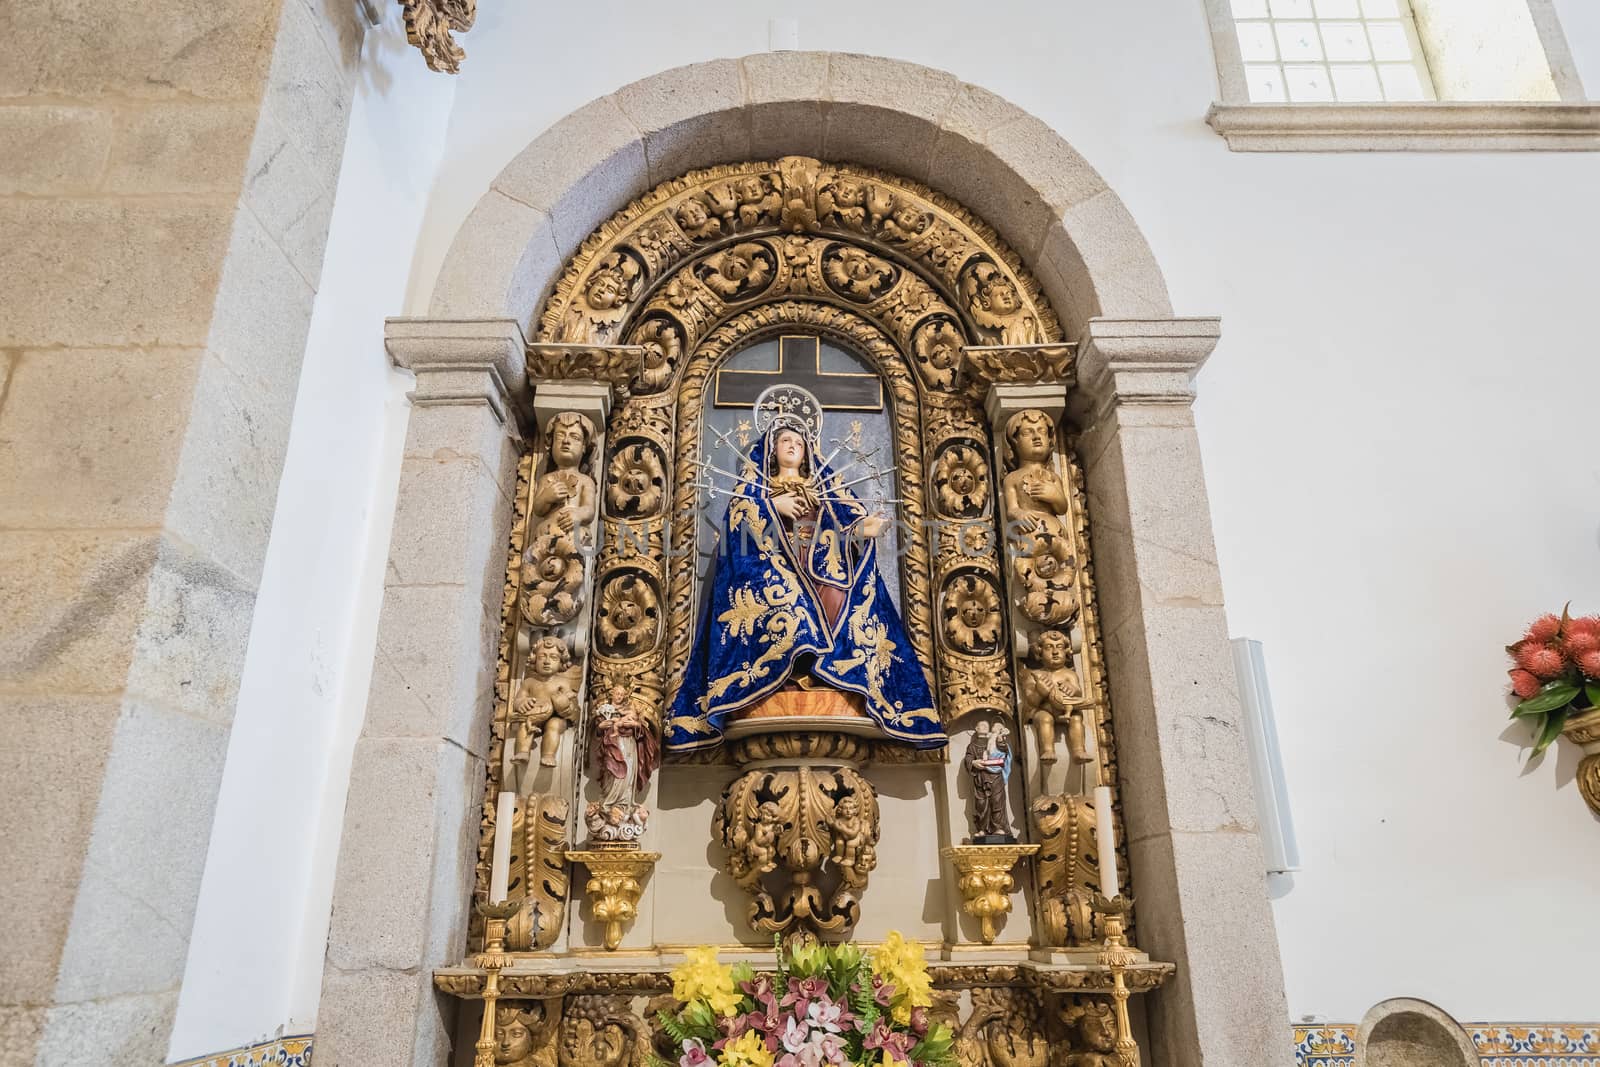 Esposende, Portugal - February 21, 2020: architectural detail of the interior of the Chapel of the Lord of the Mareantes (Capela do Senhor dos Mareantes) in the city center on a winter day